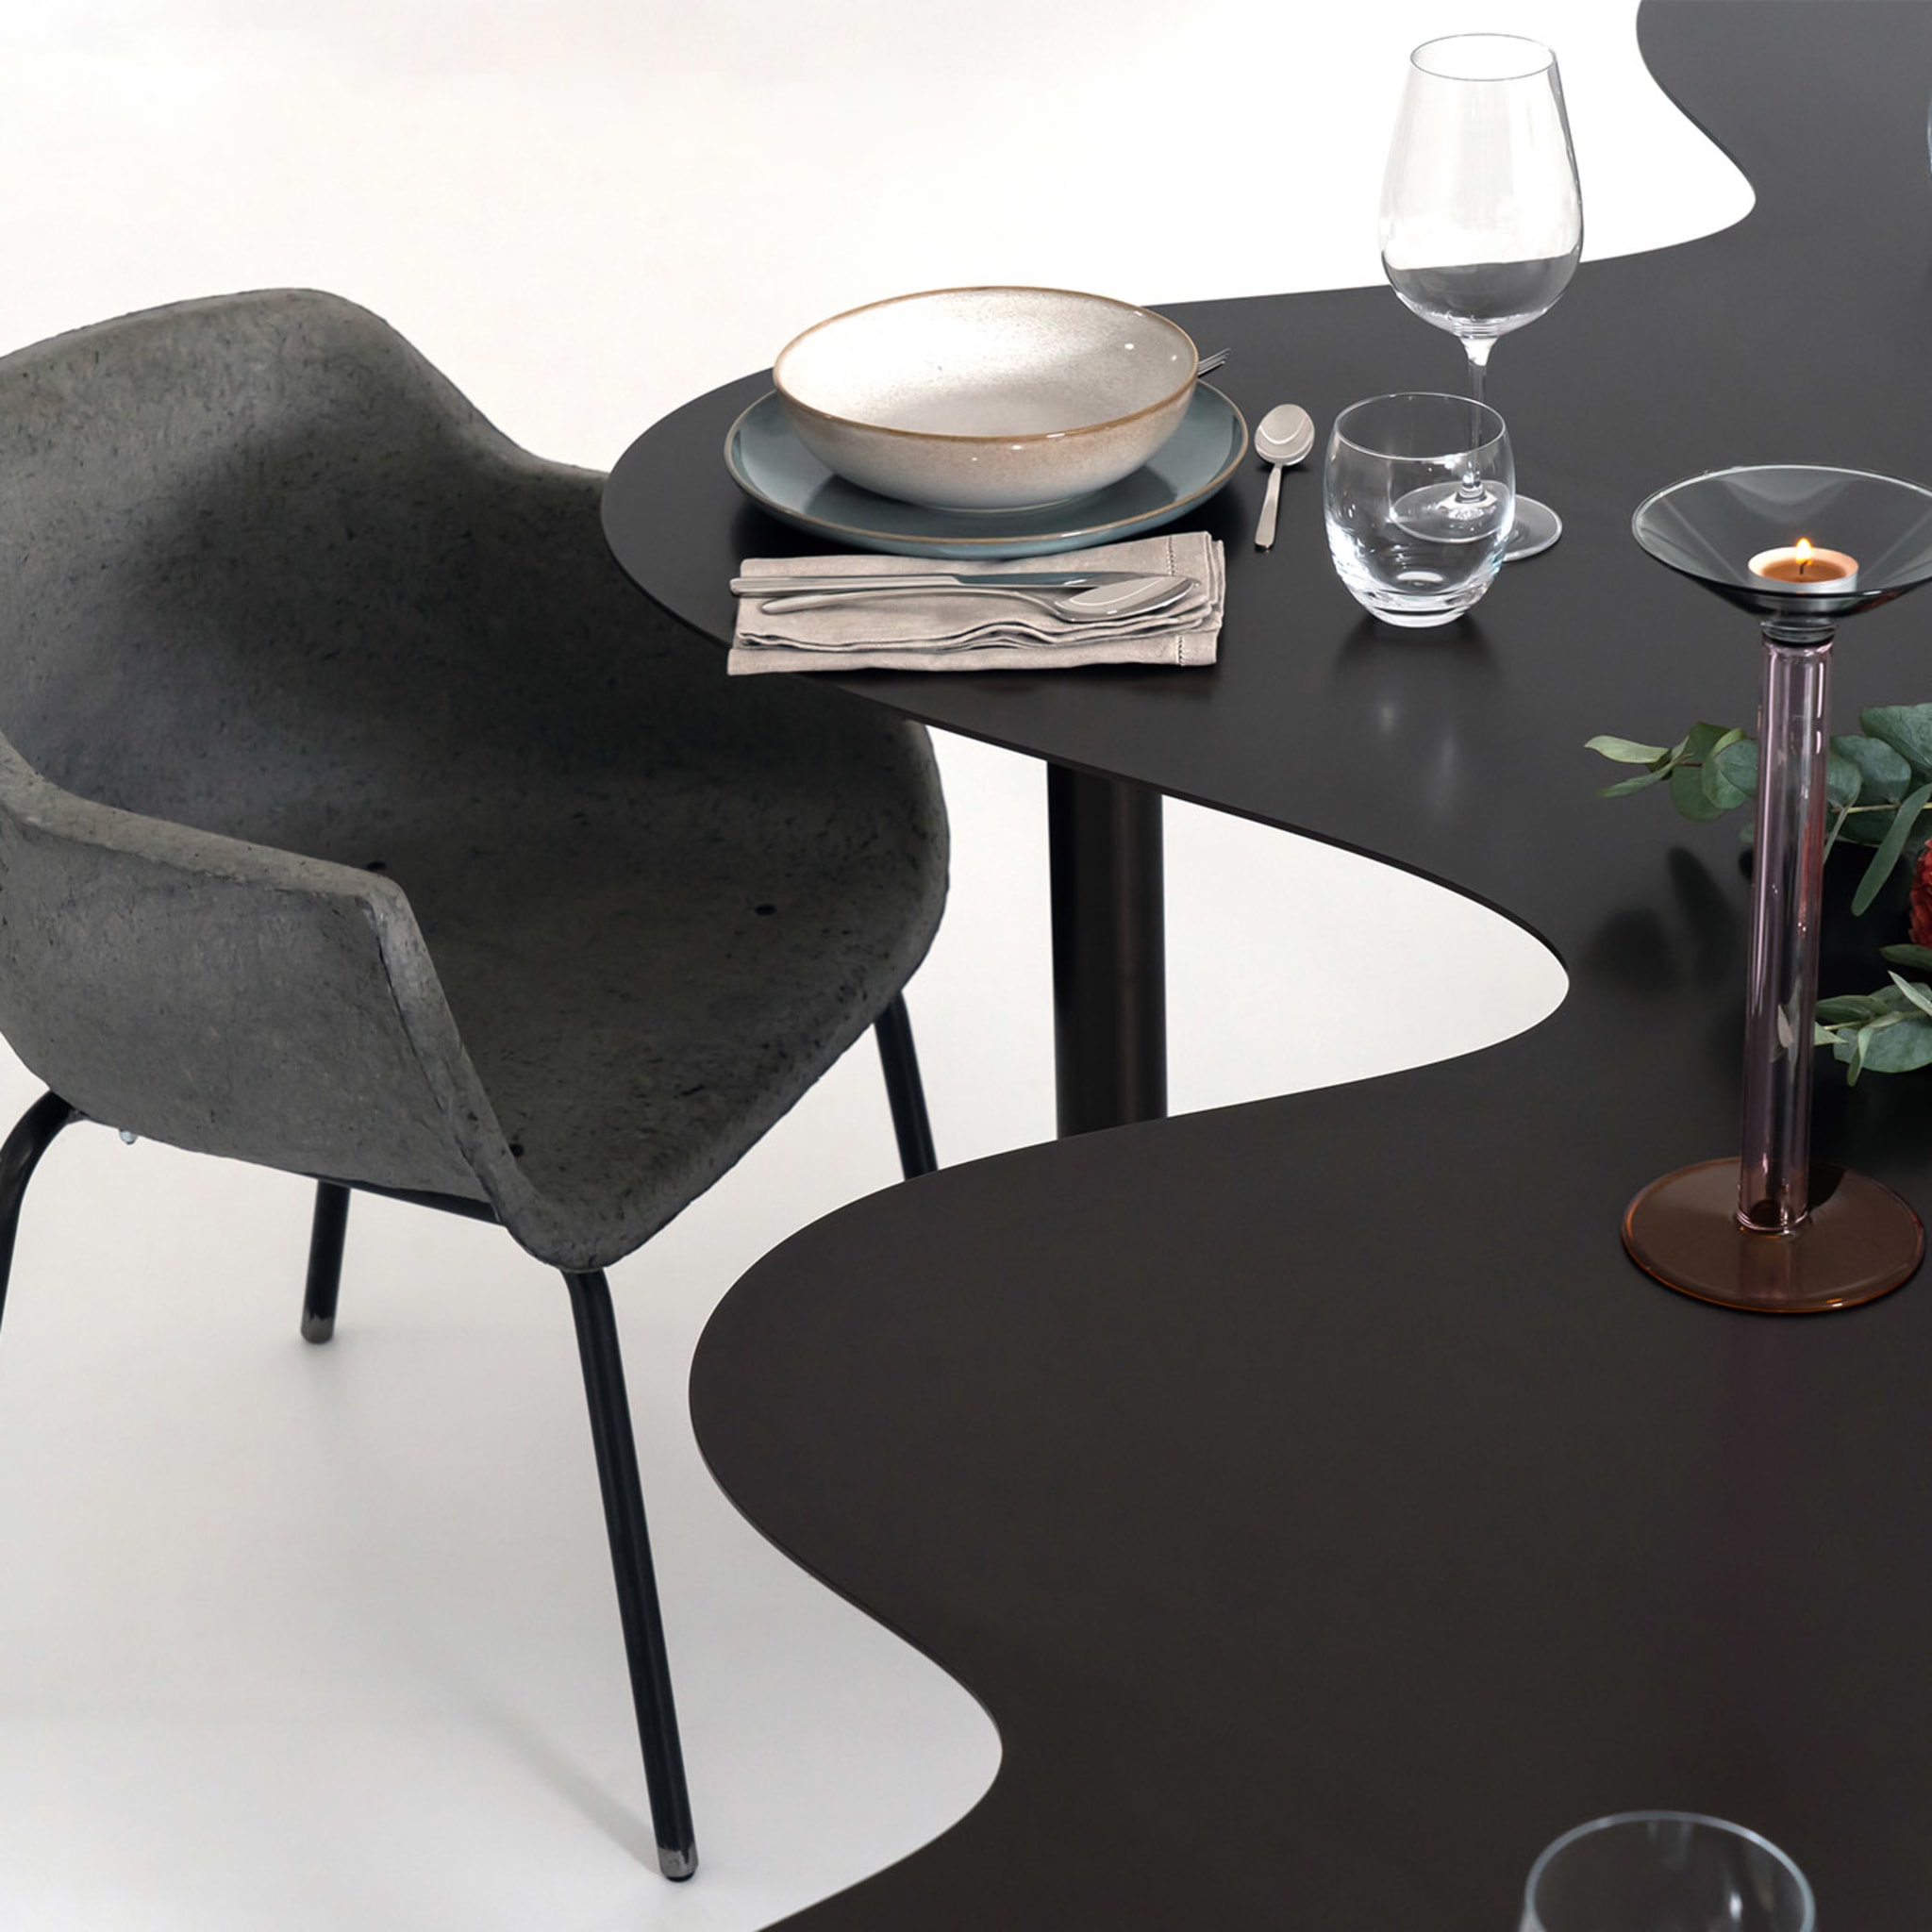 Nuvola 01 Dining Table by Mario Cucinella - Alternative view 3